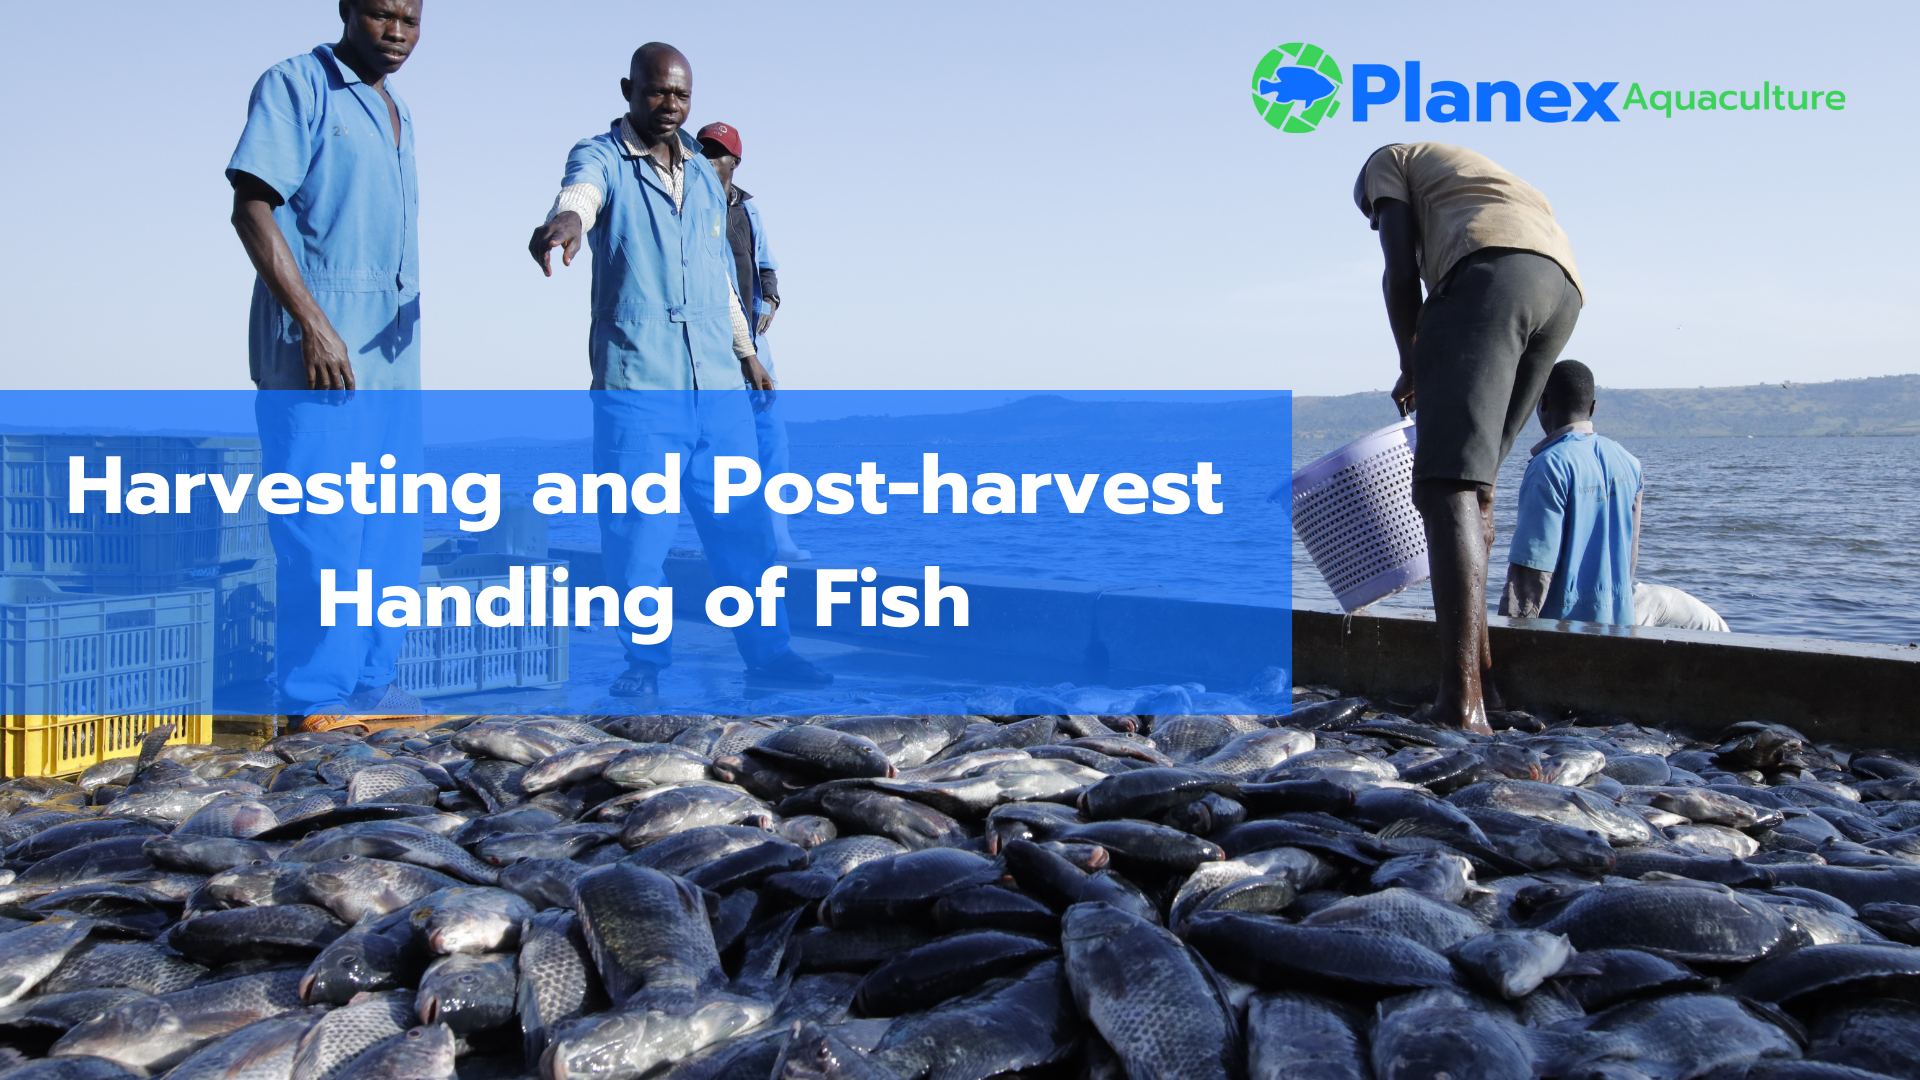 Fish harvest, and post harvest handling taking place